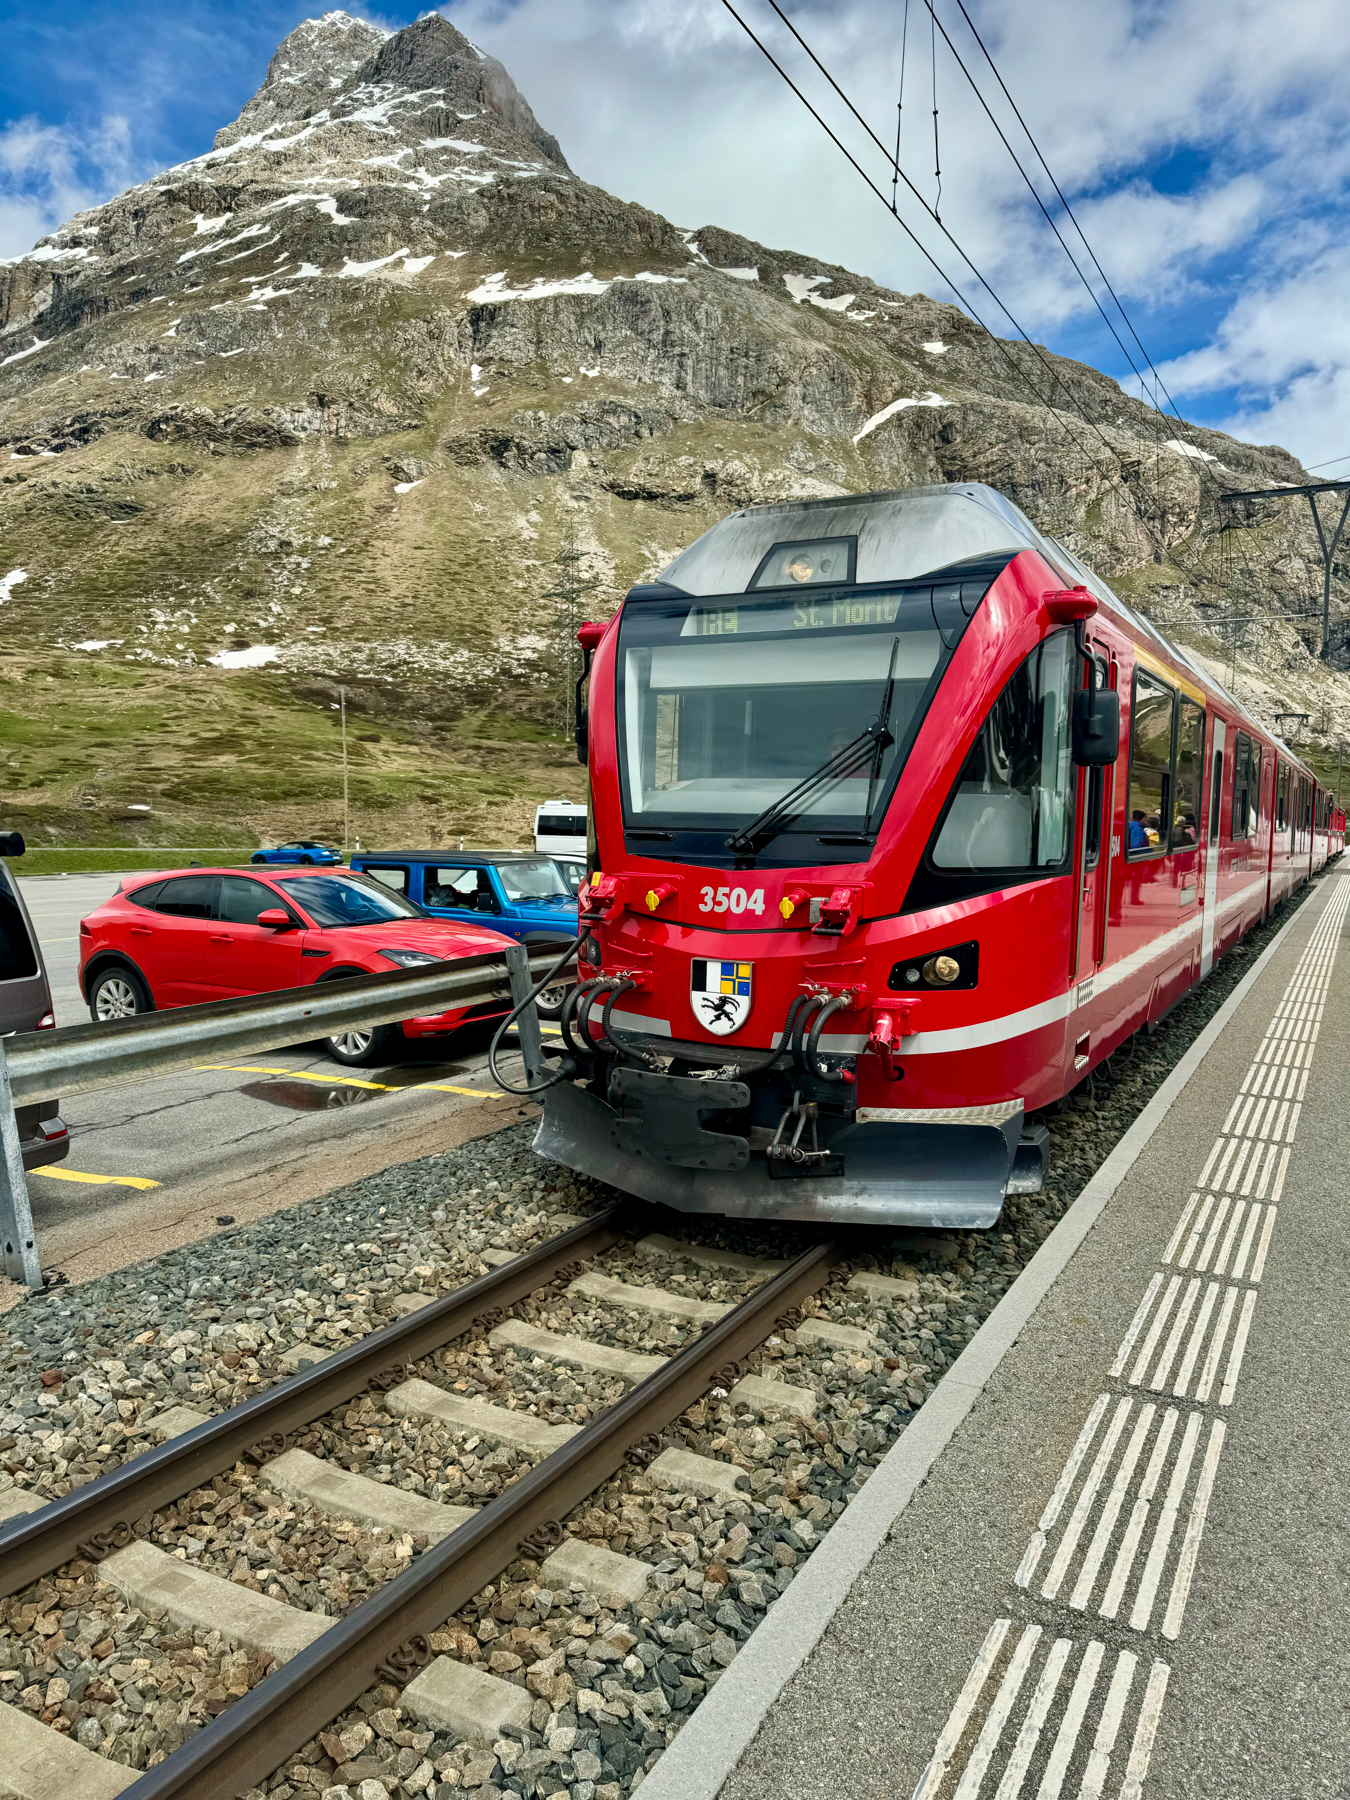 A red train with the destination sign “St. Moritz” on the front, traveling on tracks surrounded by cars with a rocky, snow-patched mountain in the background.